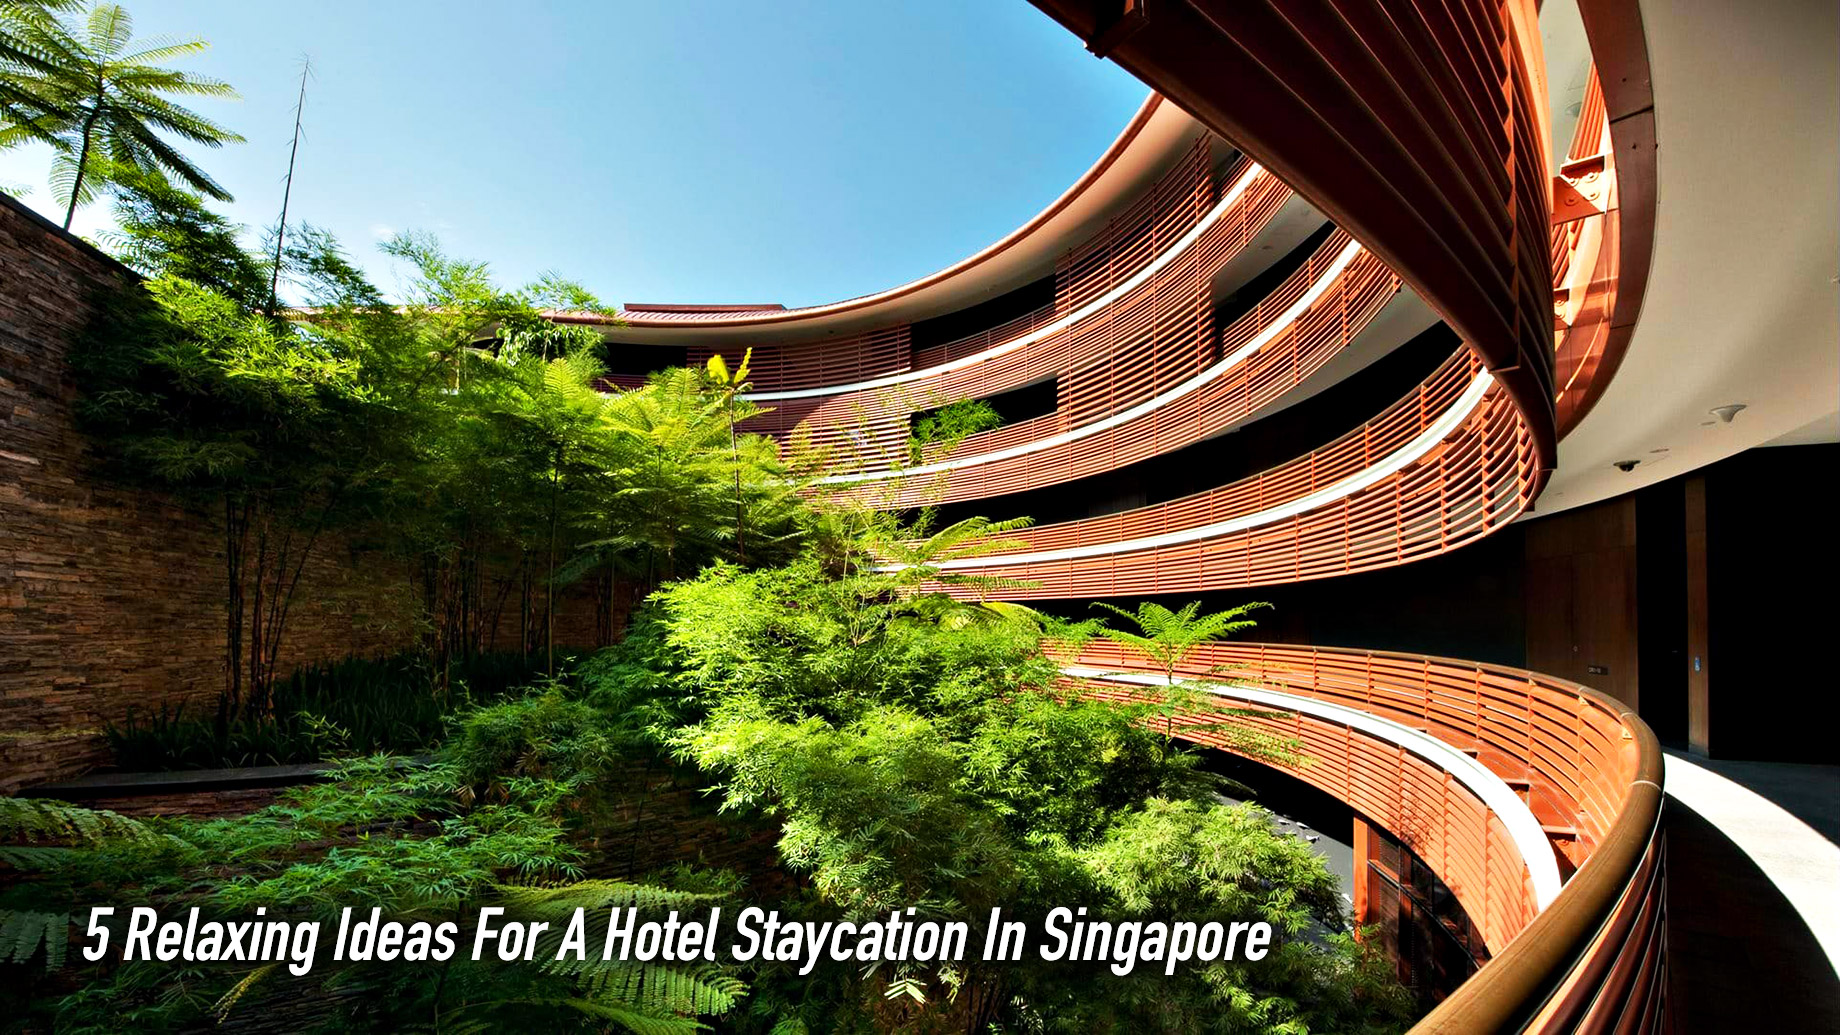 5 Relaxing Ideas For A Hotel Staycation In Singapore